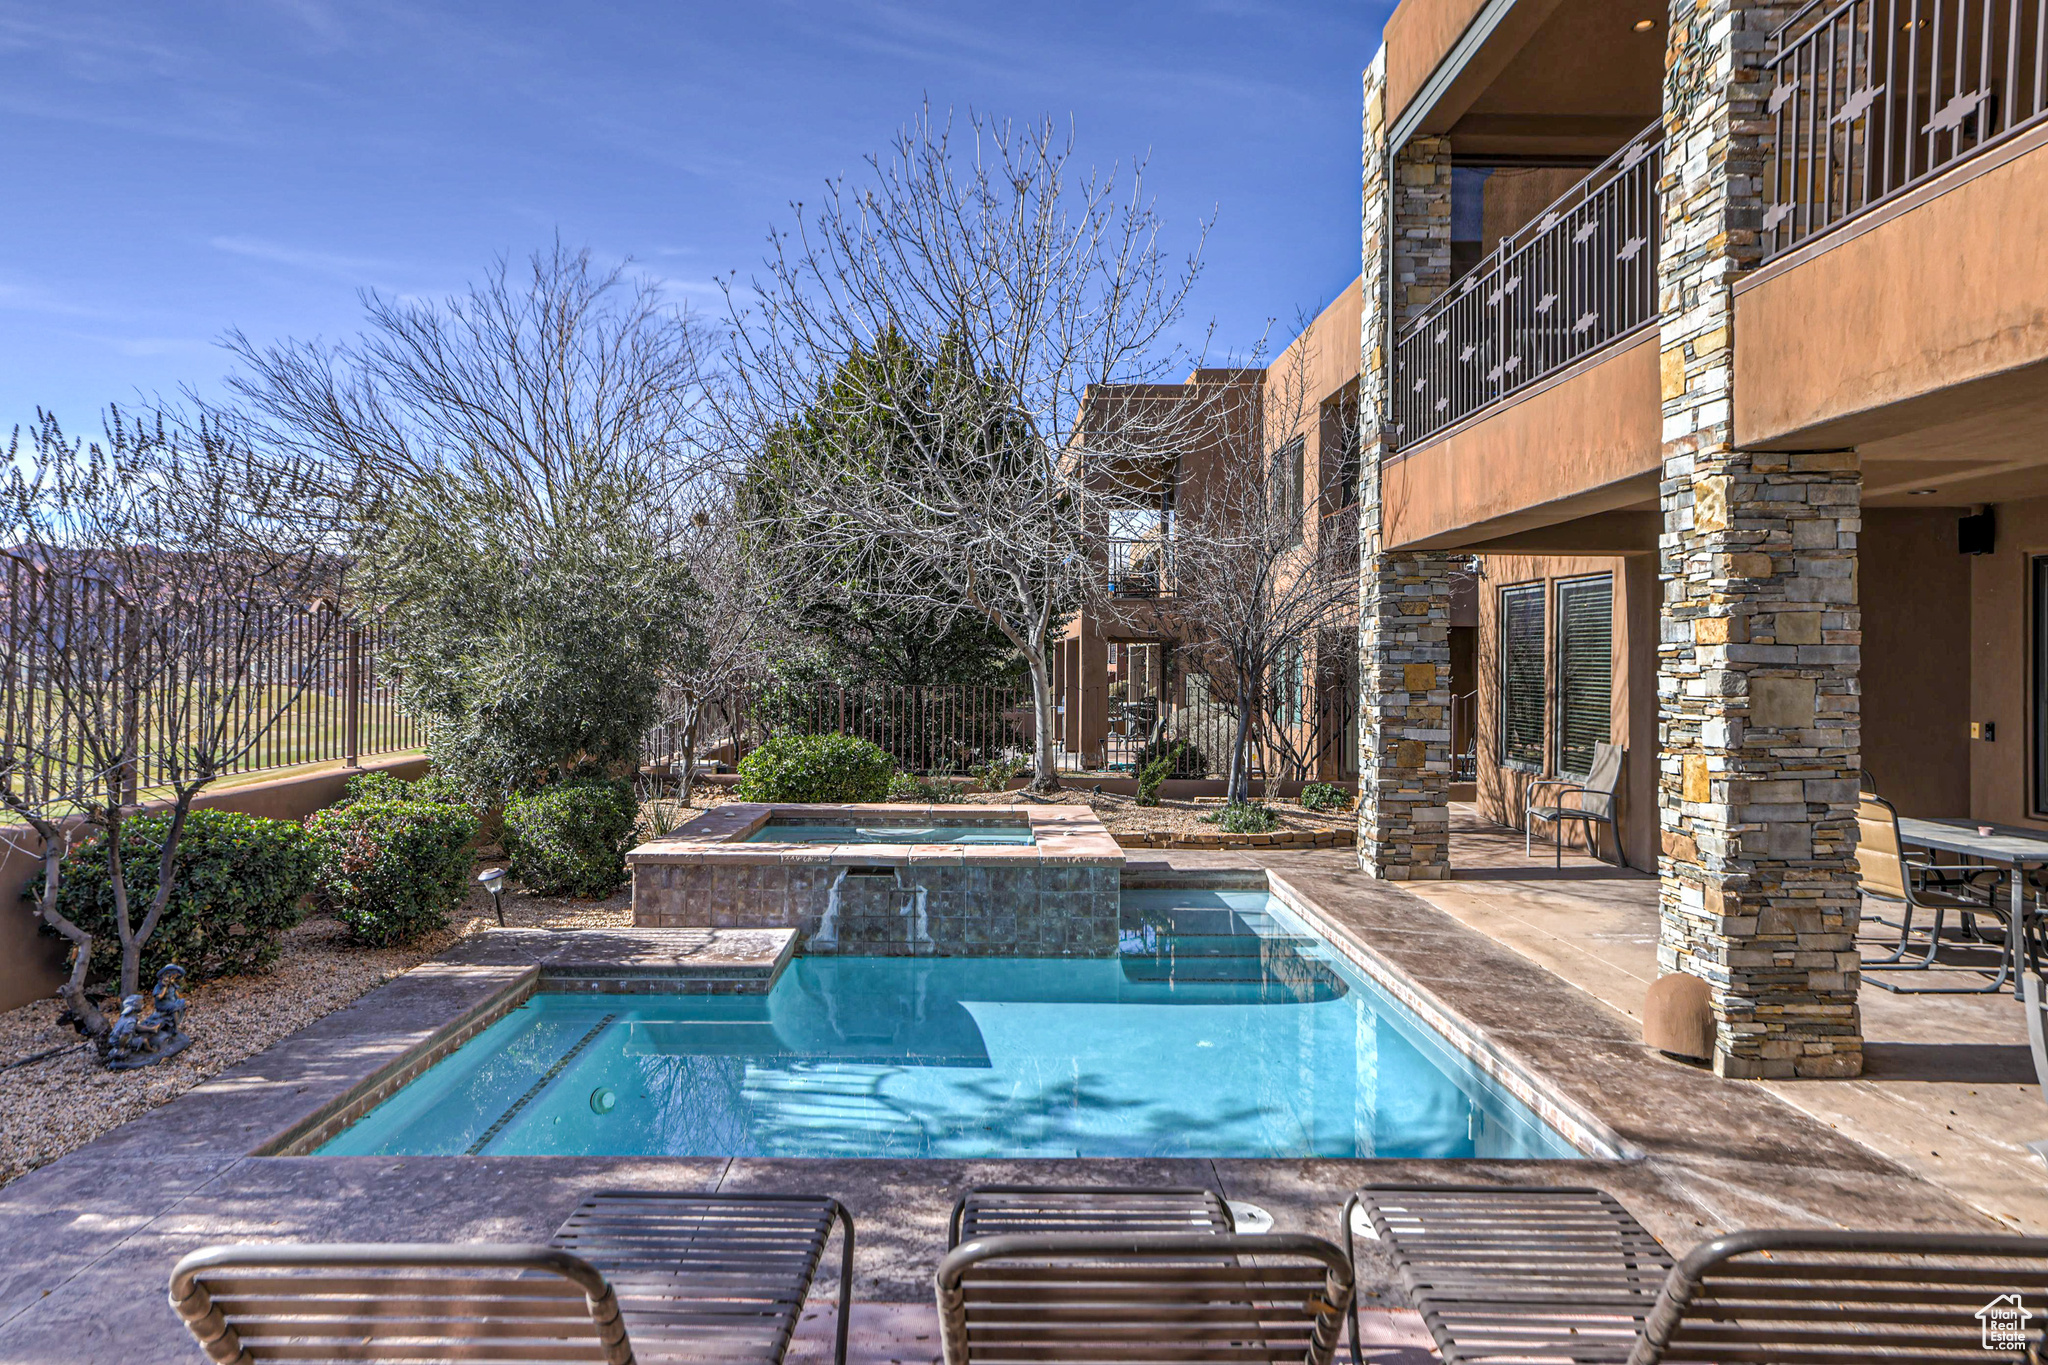 View of swimming pool with a patio and an in ground hot tub